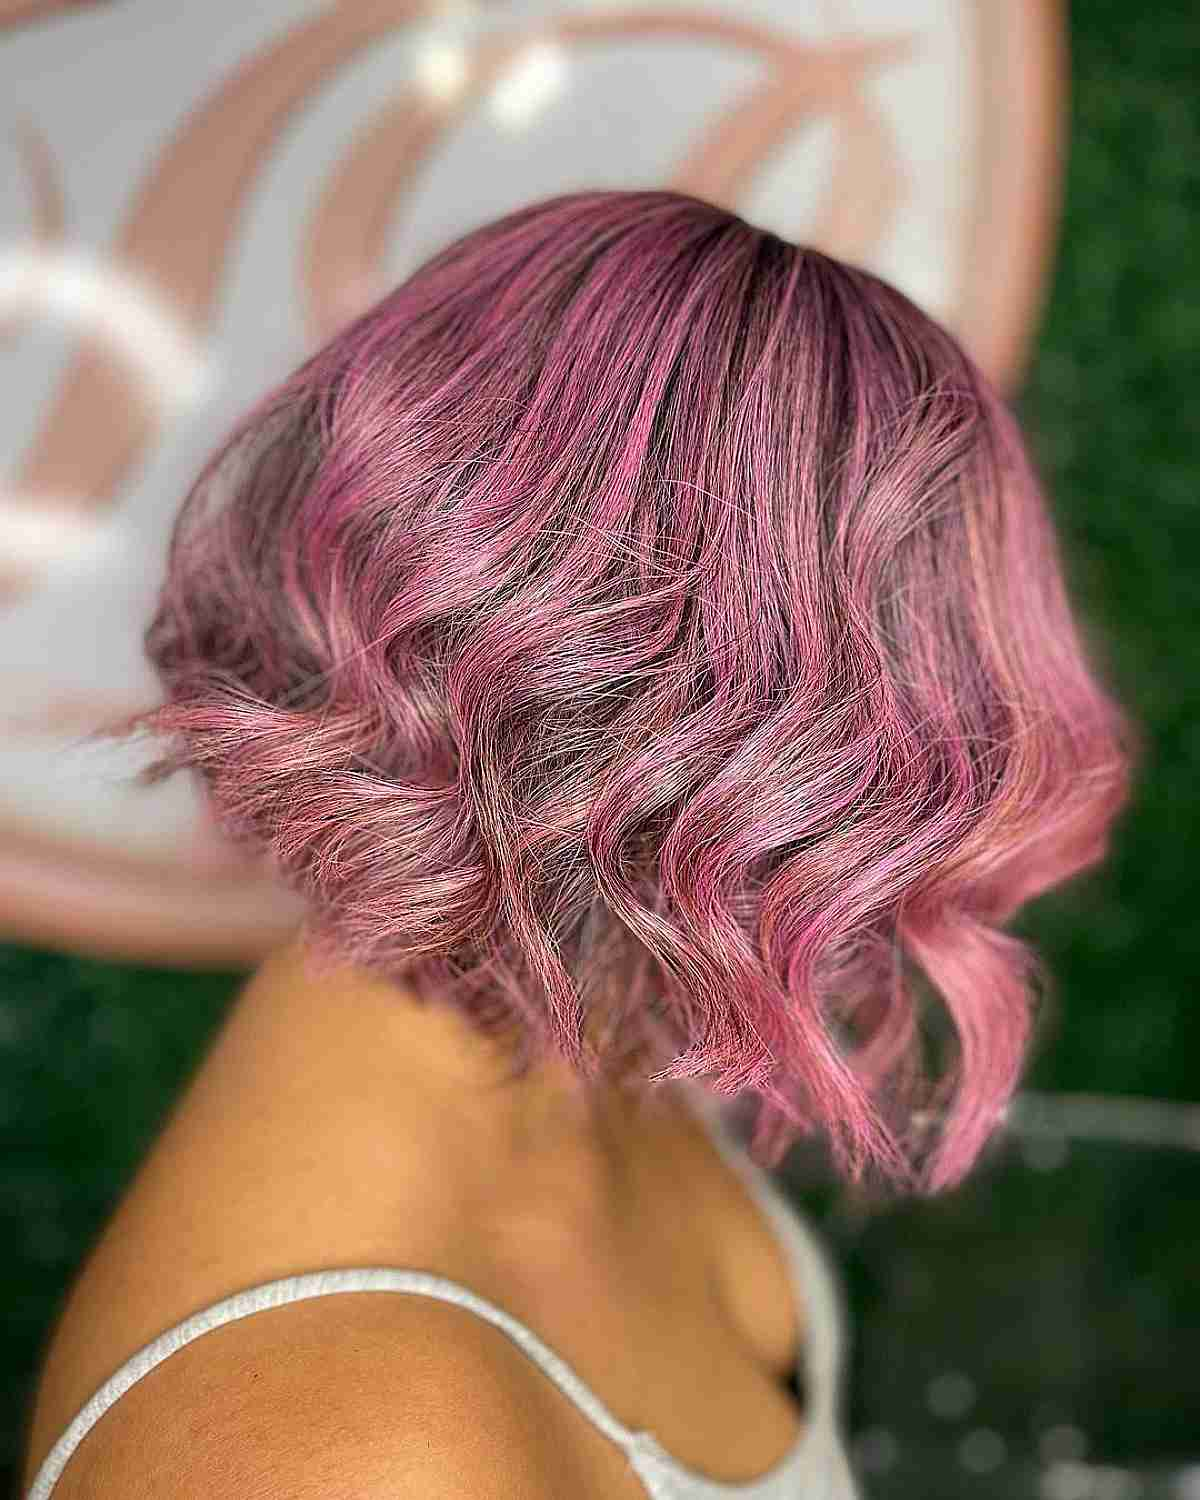 16 Immaculate Pink Balayage Hair Colors To Add Style!